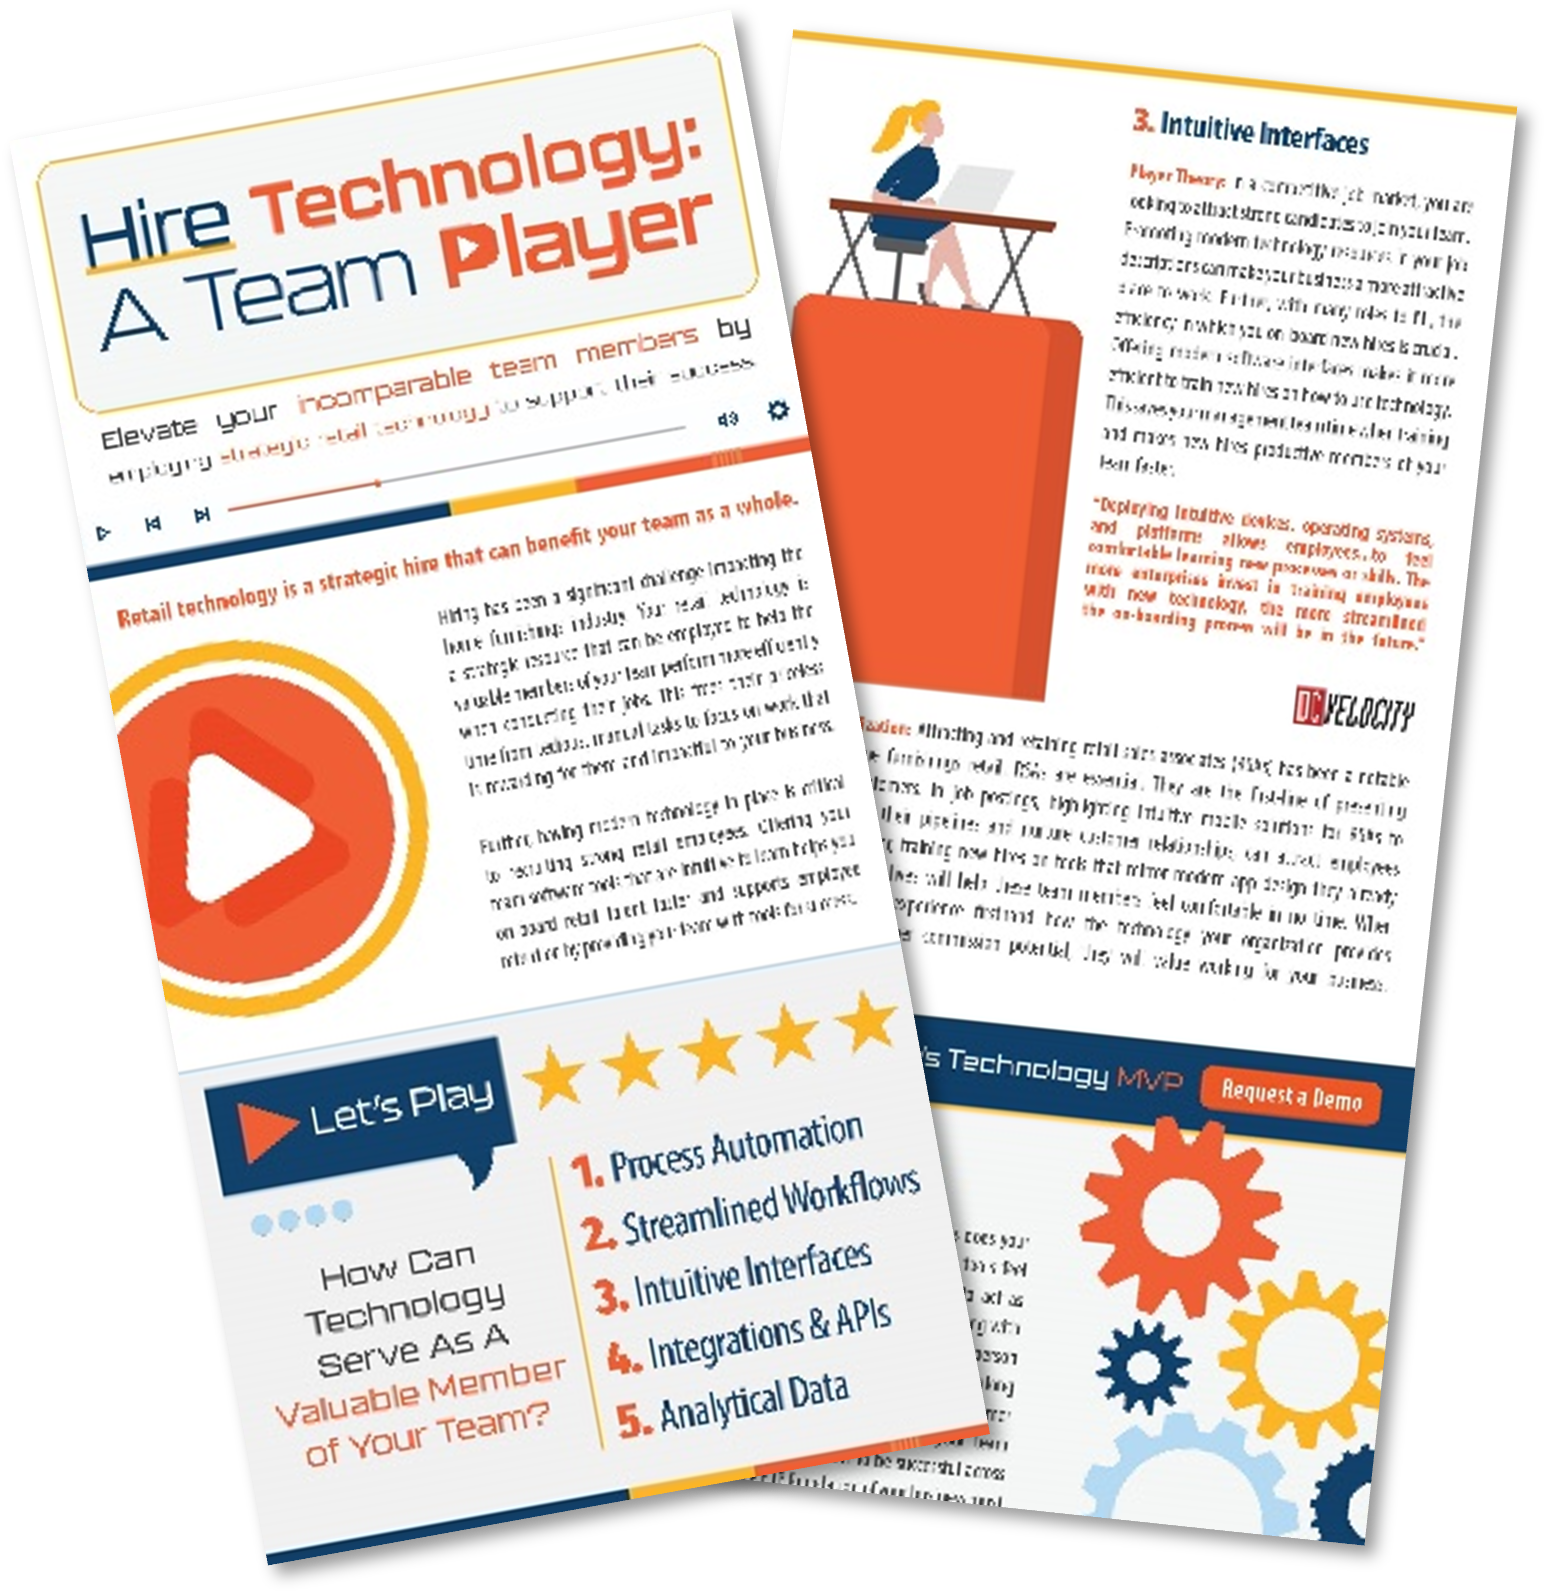 Hire Technology: A Team Player - Guide Icon